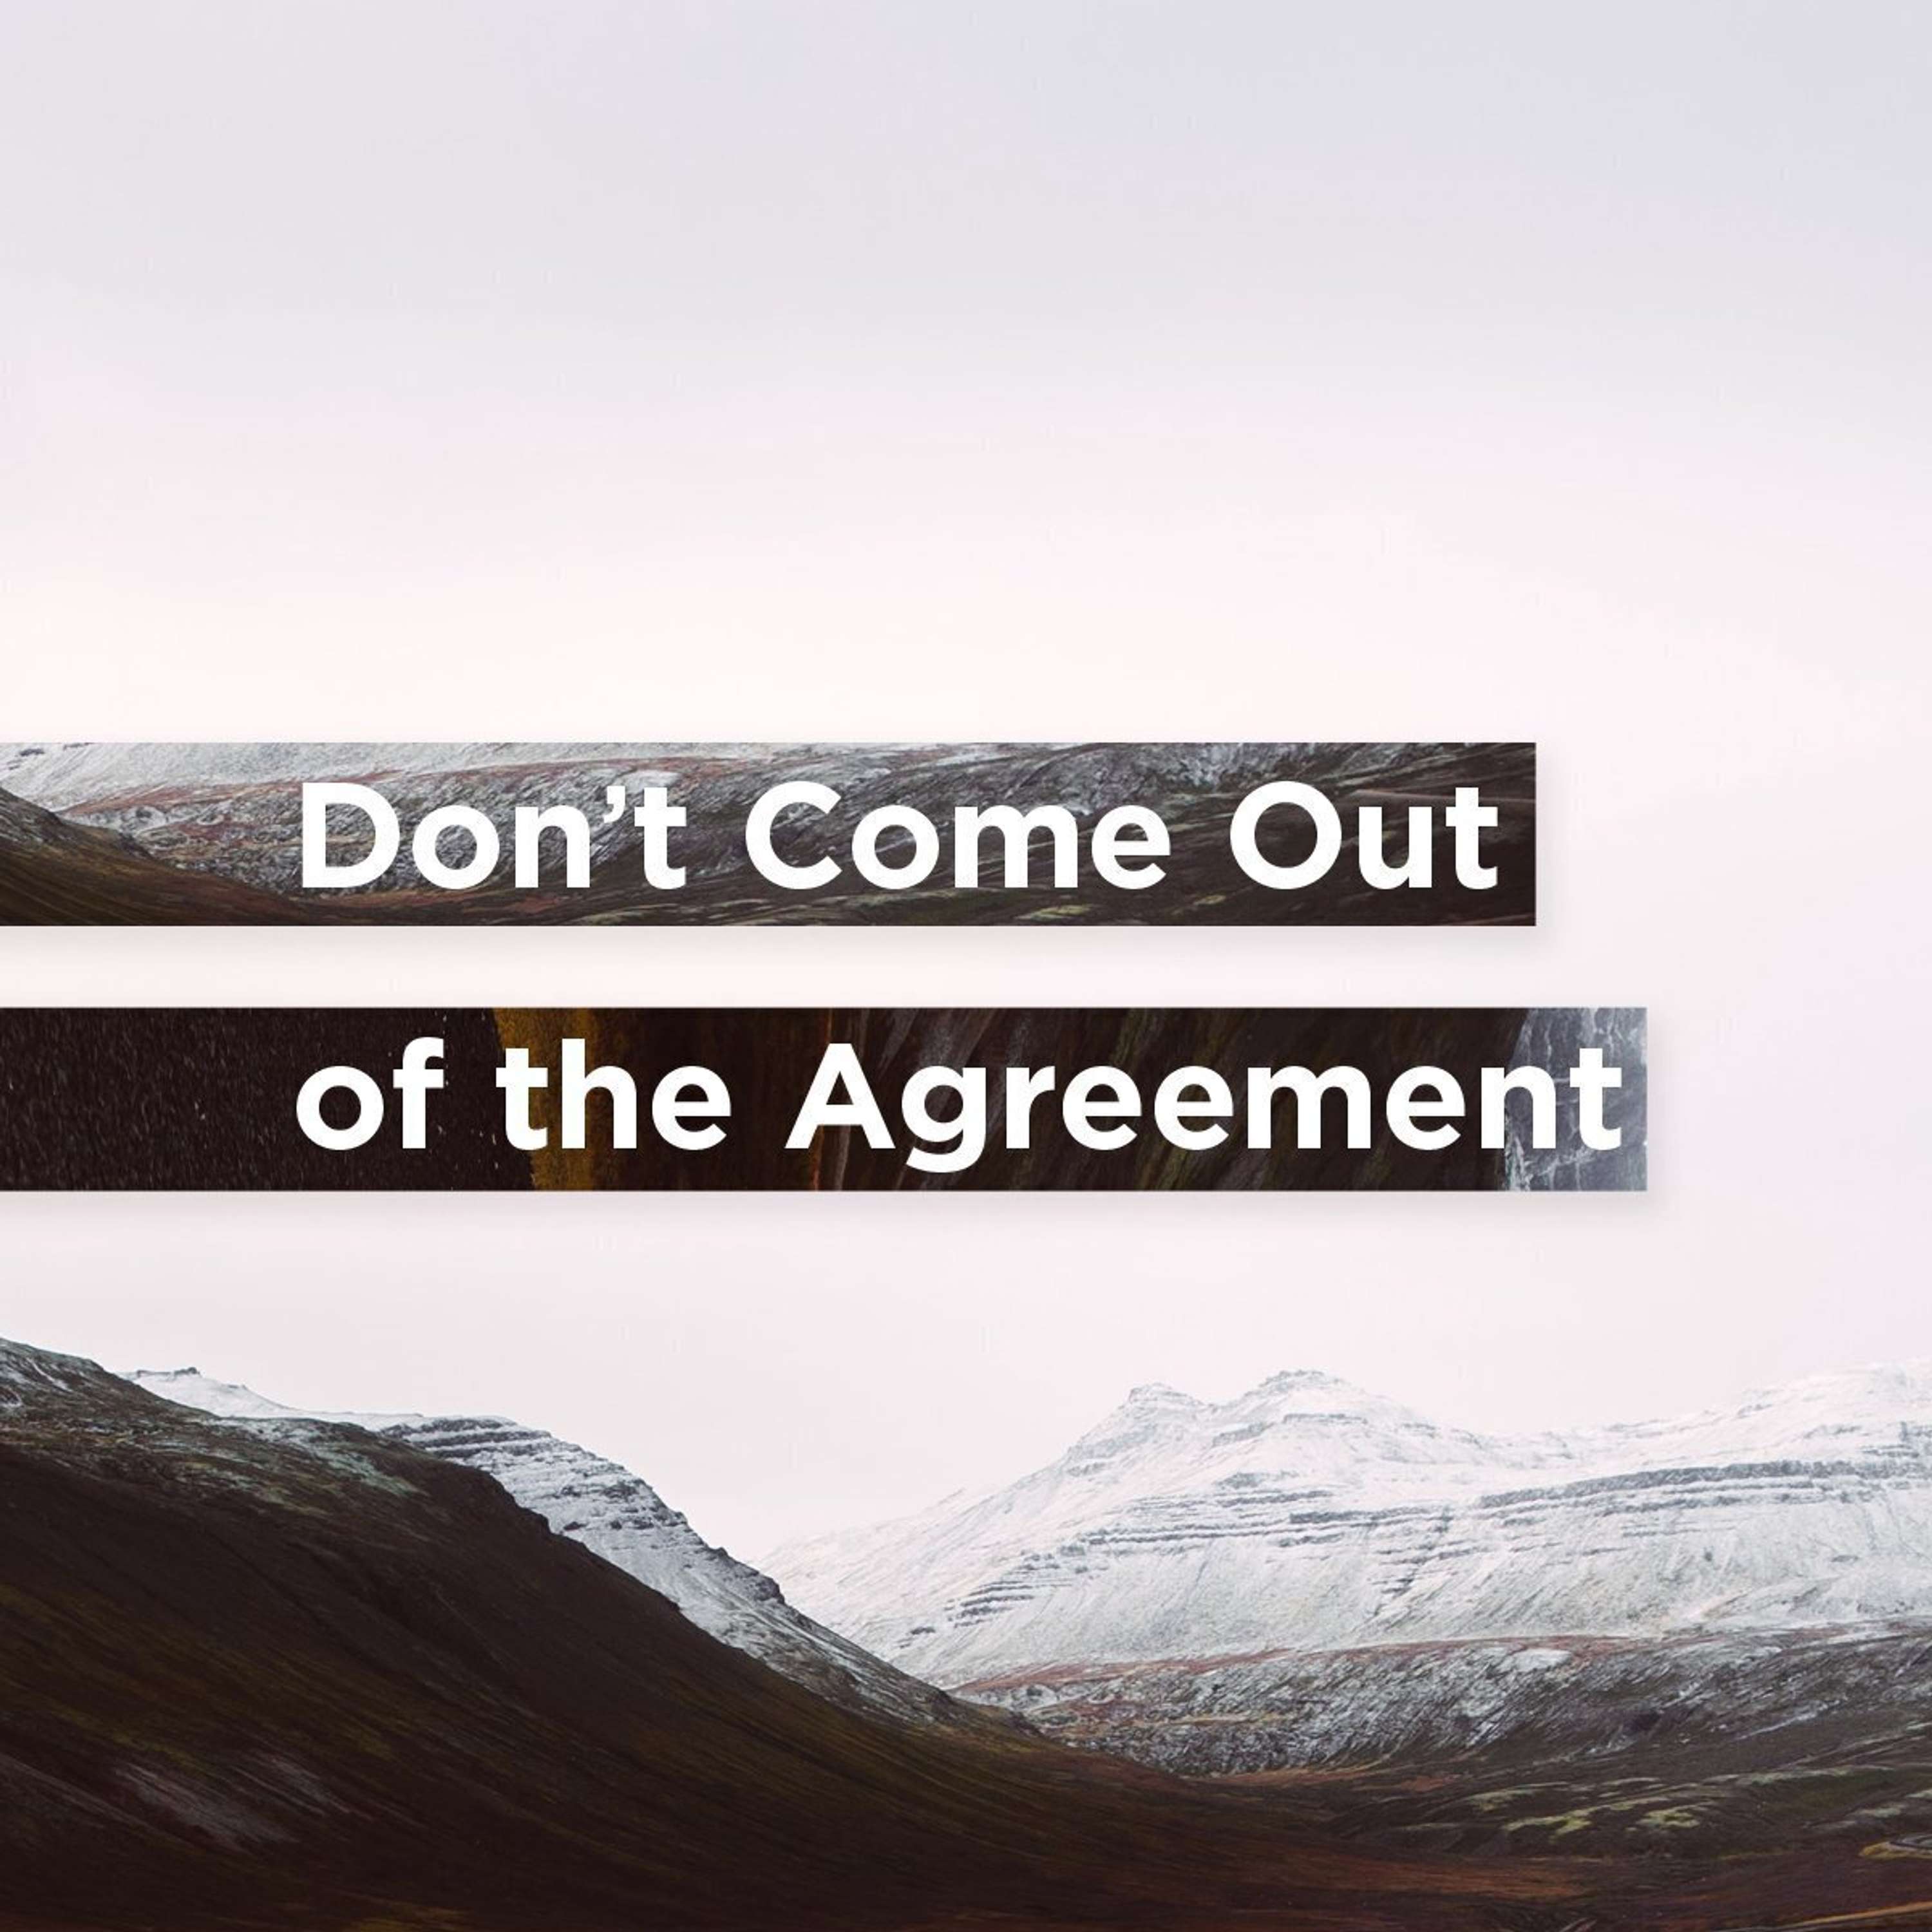 Don't Come Out of the Agreement